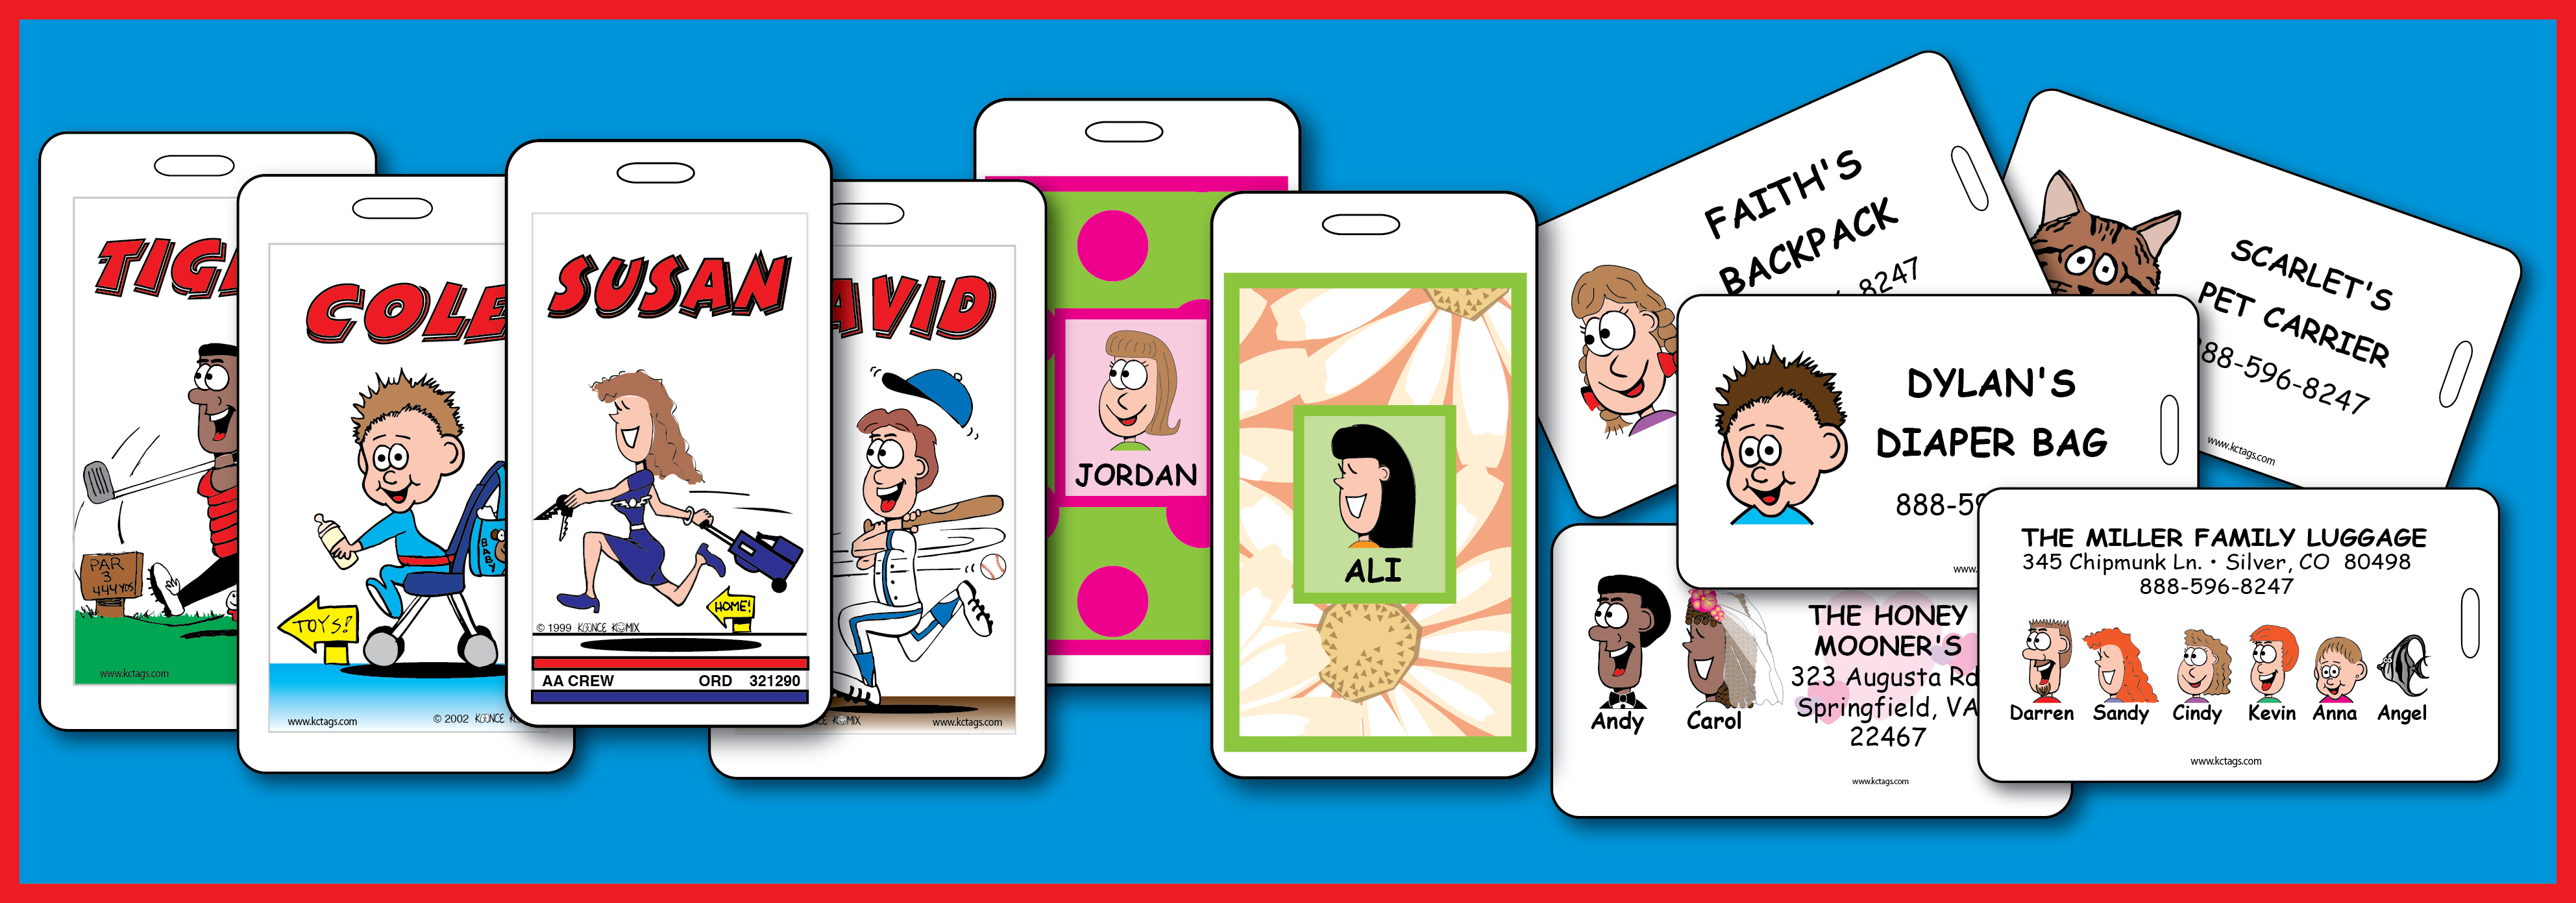 Personalized gifts products family cartoon